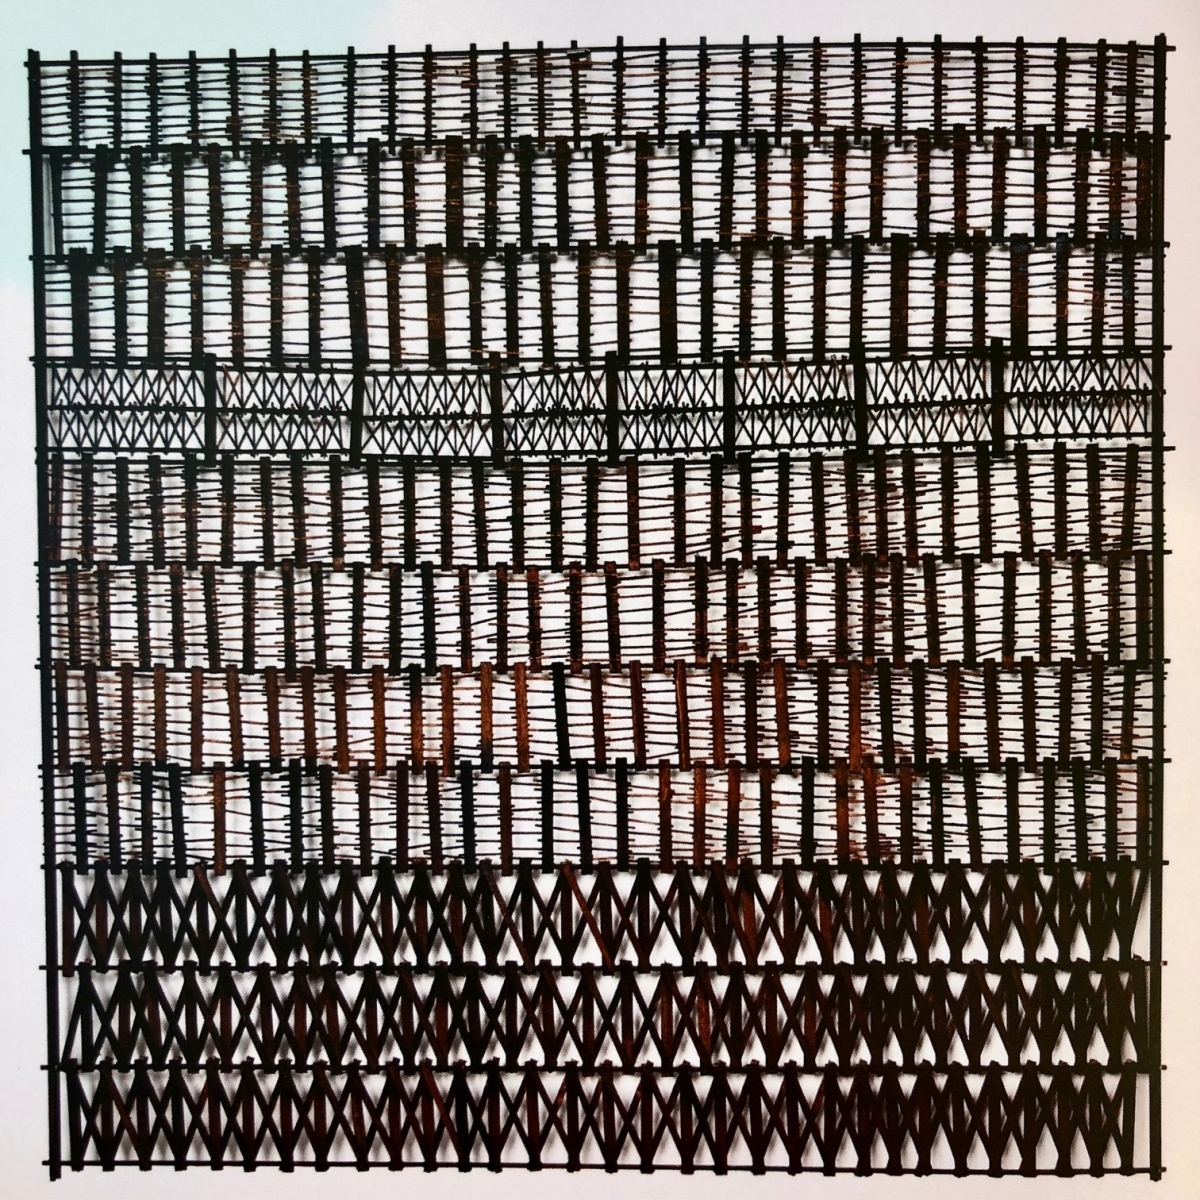 Grille, 1975, Matches and painted wood, 100x100cm